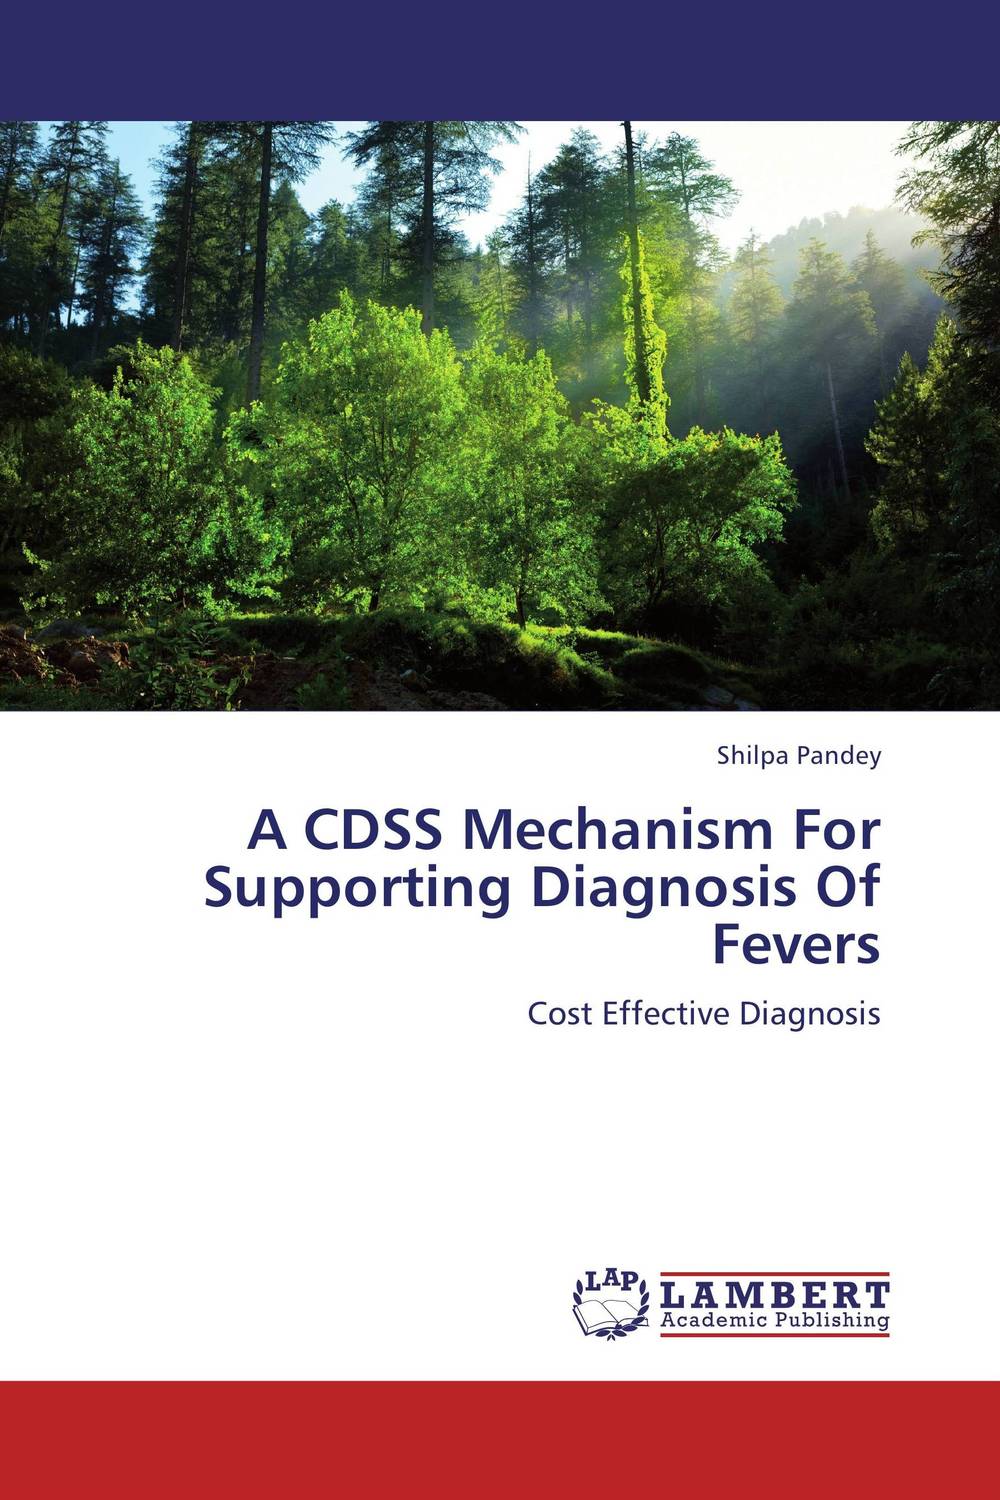 A CDSS Mechanism For Supporting Diagnosis Of Fevers